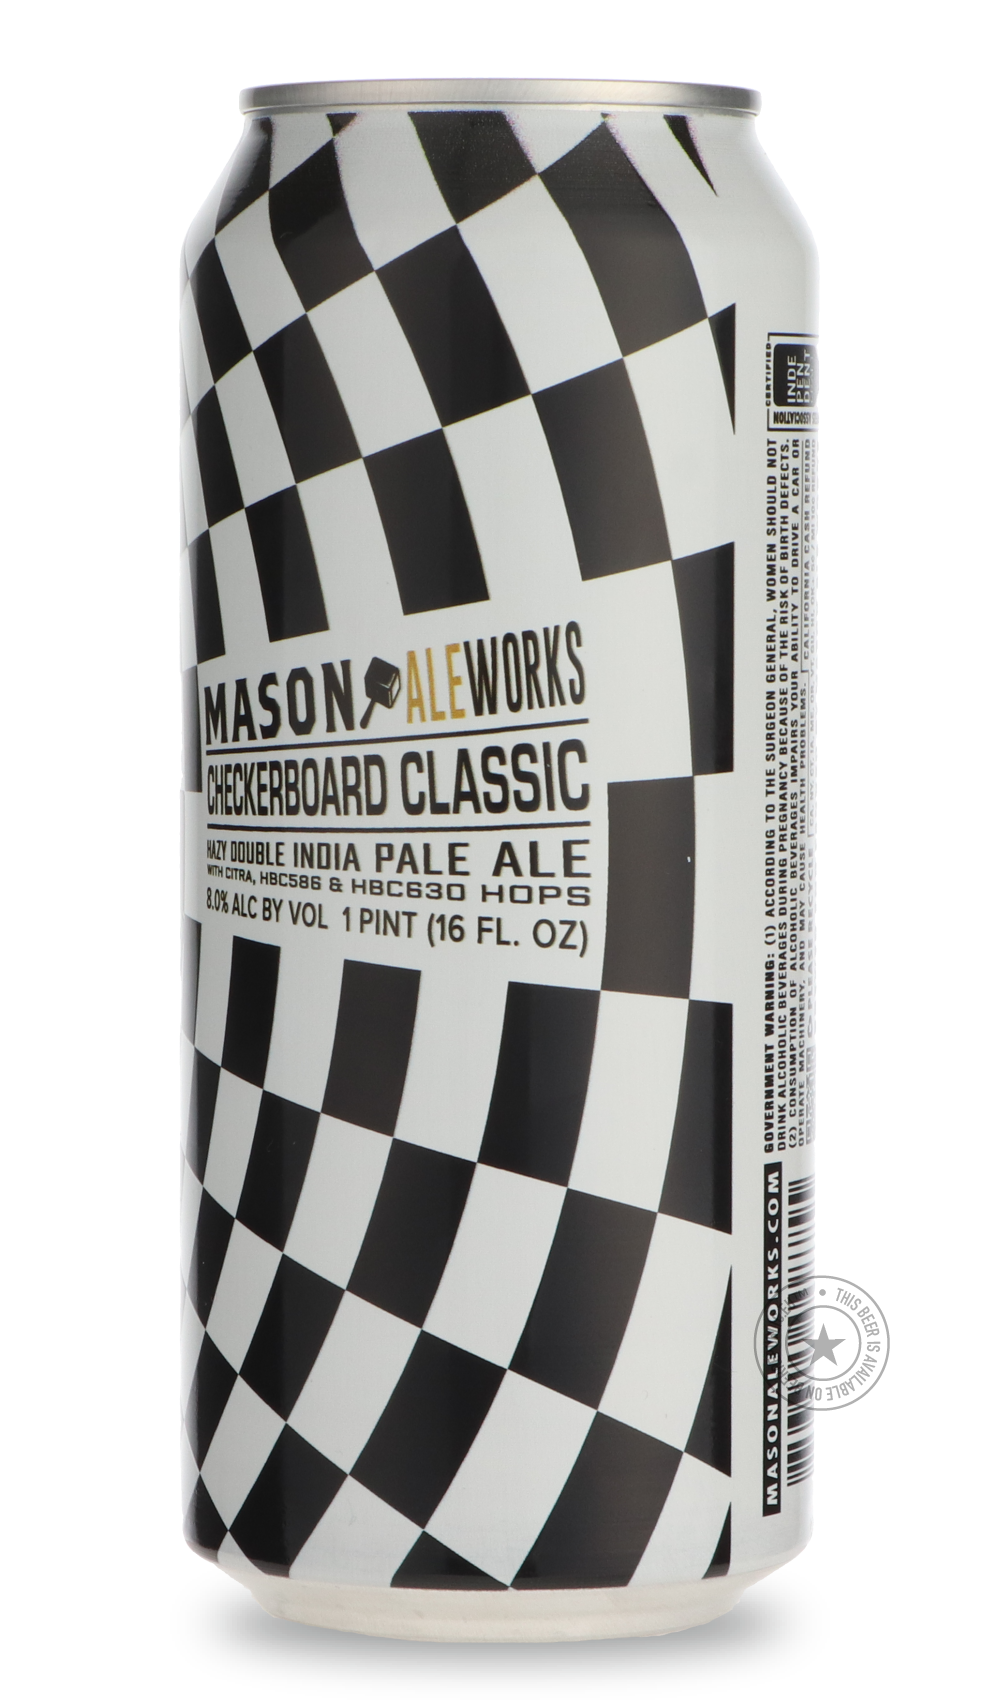 -Mason Ale Works- Checkerboard Classic-IPA- Only @ Beer Republic - The best online beer store for American & Canadian craft beer - Buy beer online from the USA and Canada - Bier online kopen - Amerikaans bier kopen - Craft beer store - Craft beer kopen - Amerikanisch bier kaufen - Bier online kaufen - Acheter biere online - IPA - Stout - Porter - New England IPA - Hazy IPA - Imperial Stout - Barrel Aged - Barrel Aged Imperial Stout - Brown - Dark beer - Blond - Blonde - Pilsner - Lager - Wheat - Weizen - Am